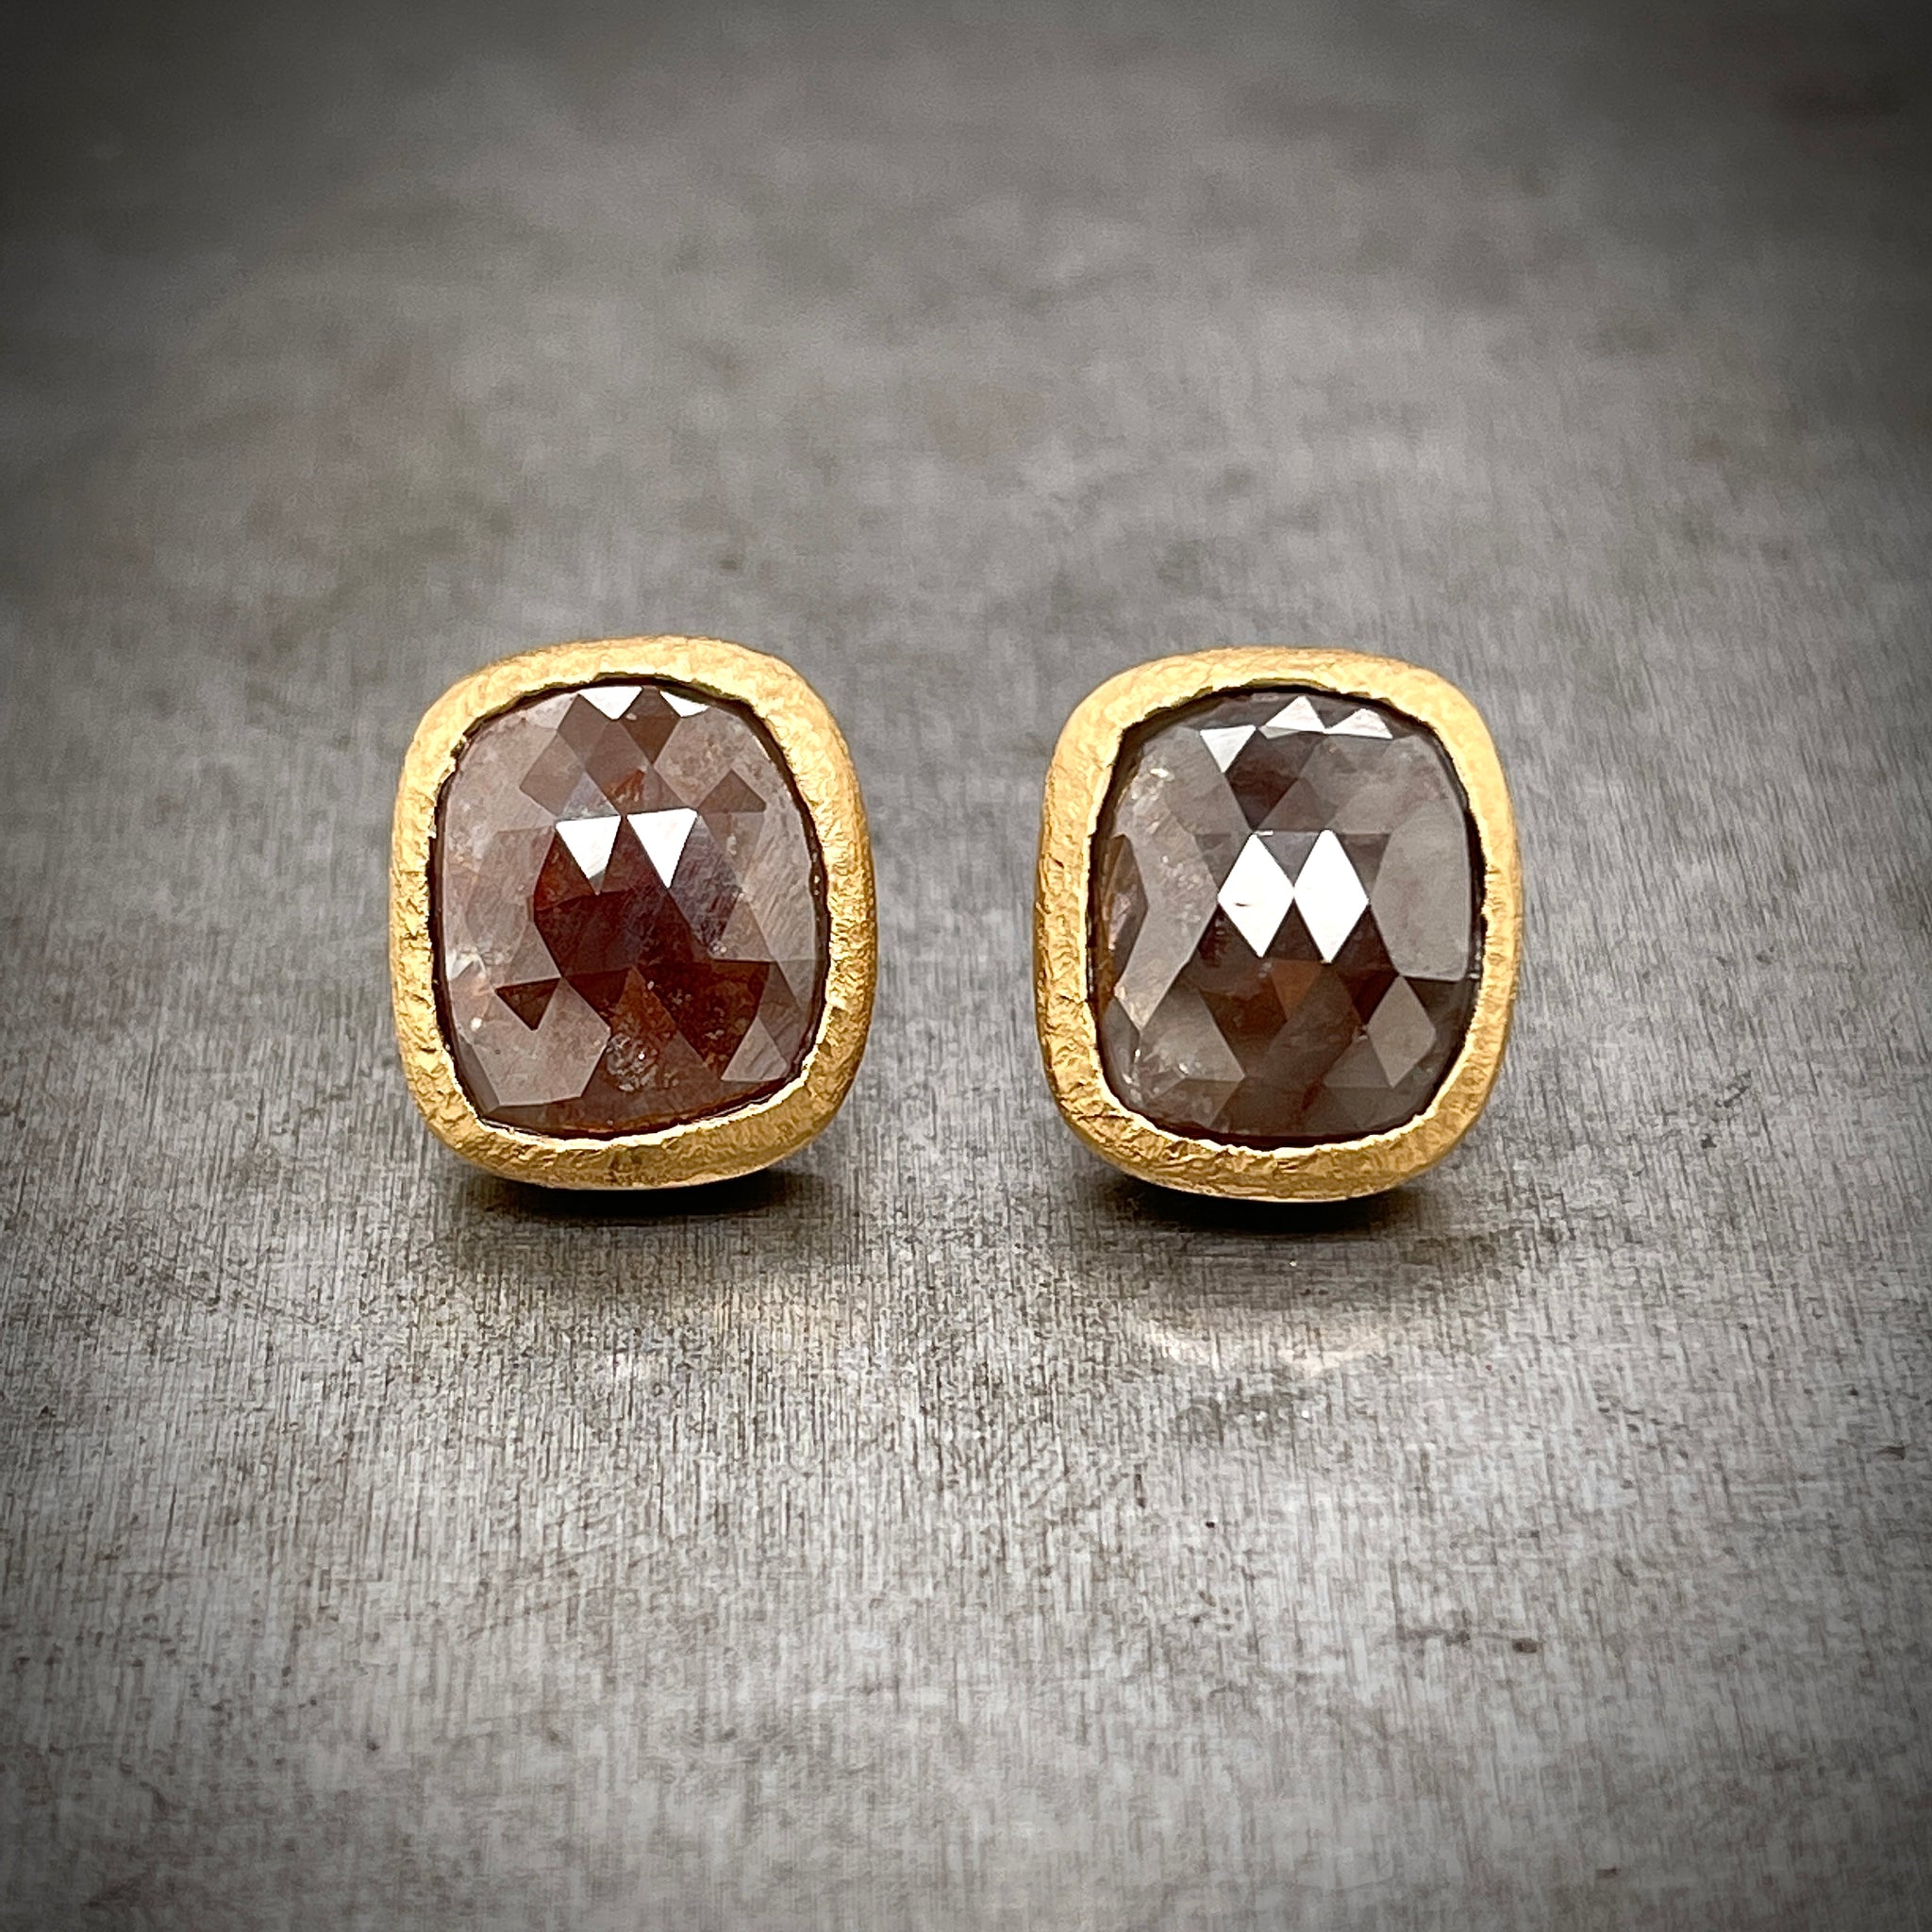 Front View of rose cut red/brown diamond stud earrings.